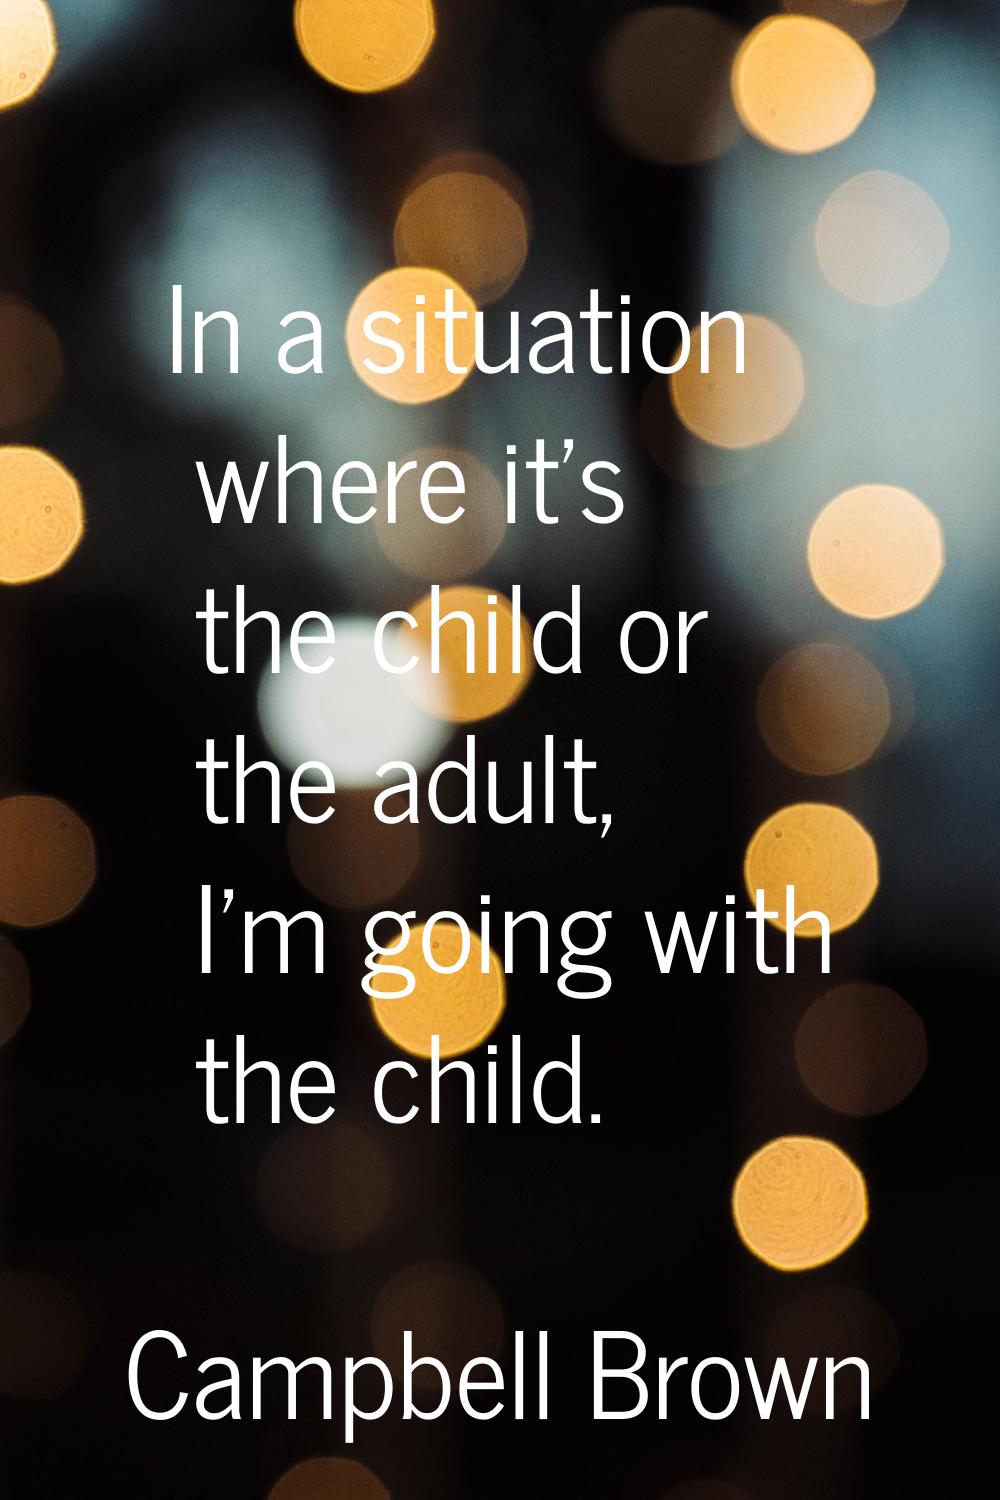 In a situation where it's the child or the adult, I'm going with the child.